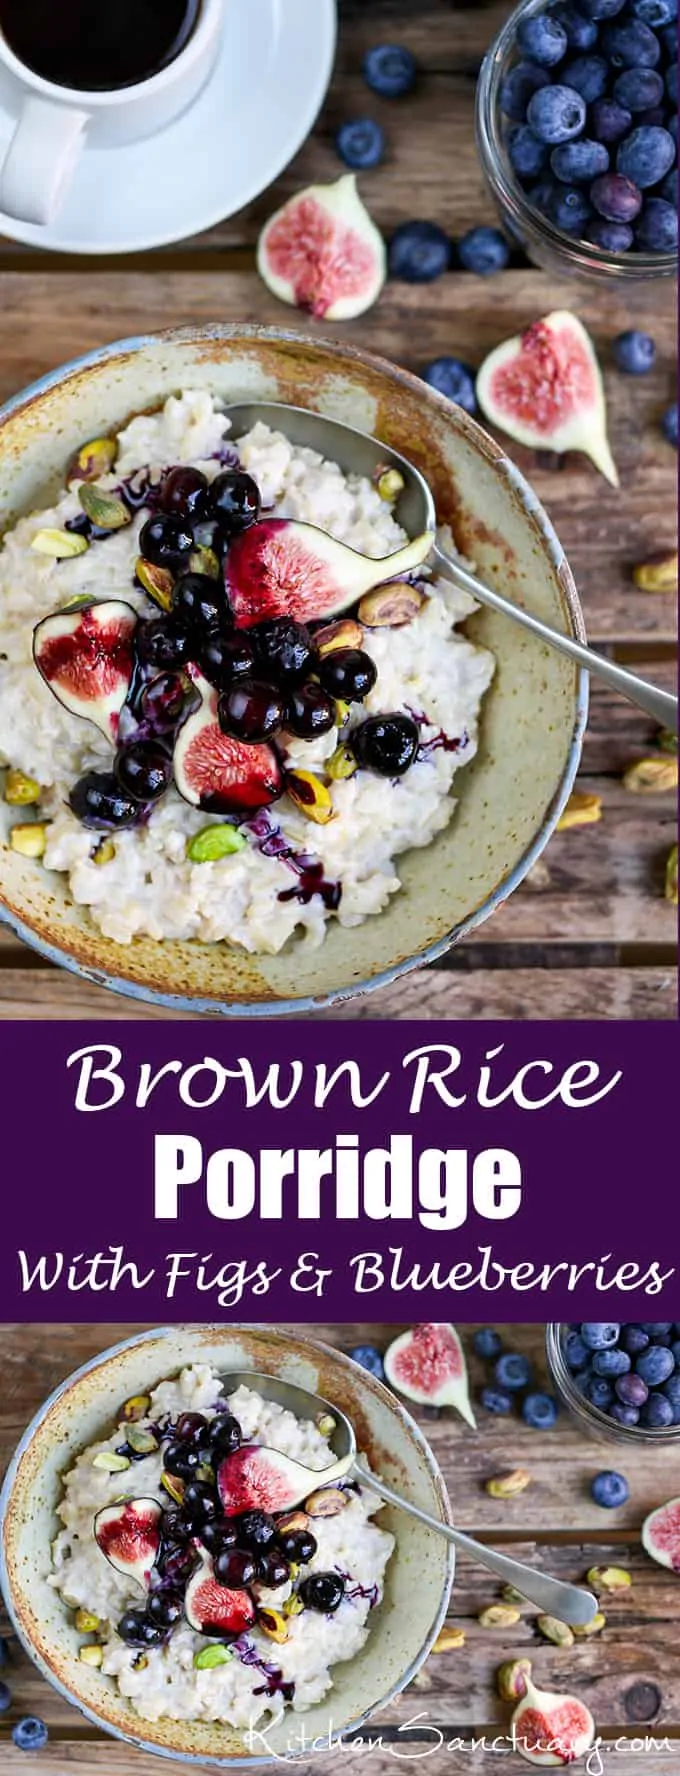 Brown Rice Porridge with figs, blueberries and pistachios. A healthy breakfast that's a little bit different. I thought it would taste weird, but it's really good!